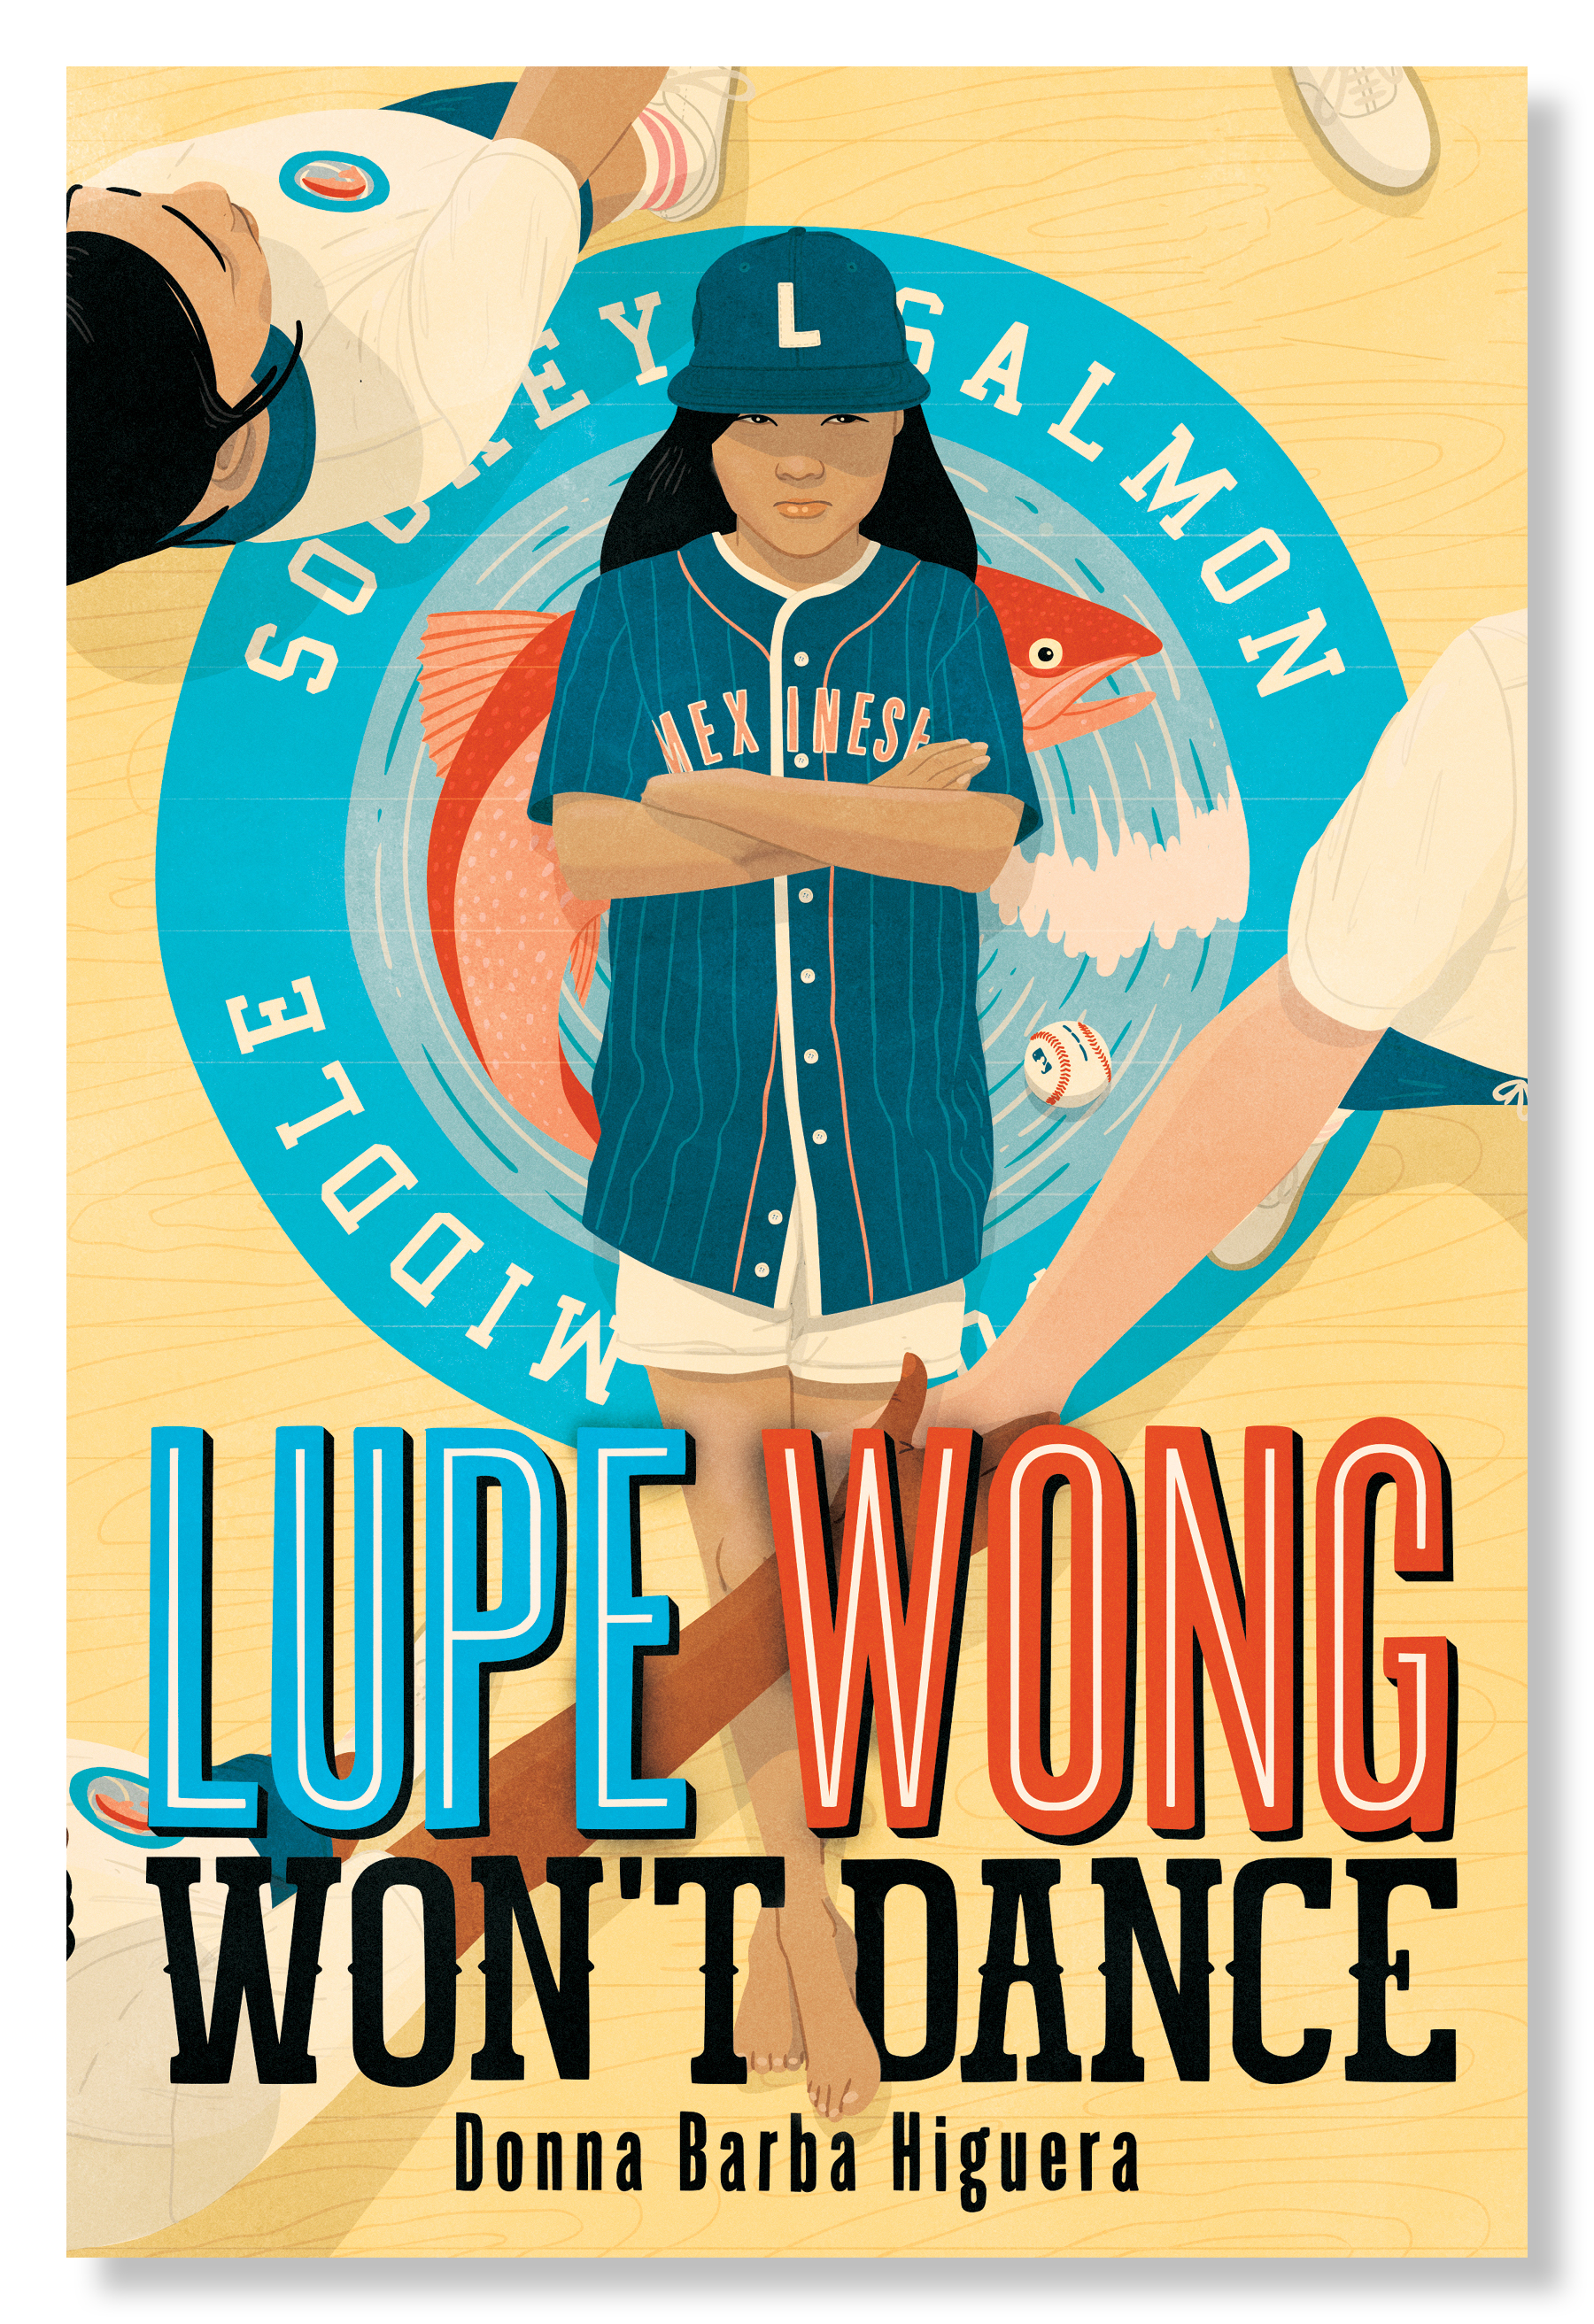 LupeWongWontDance_FrontCover.jpg